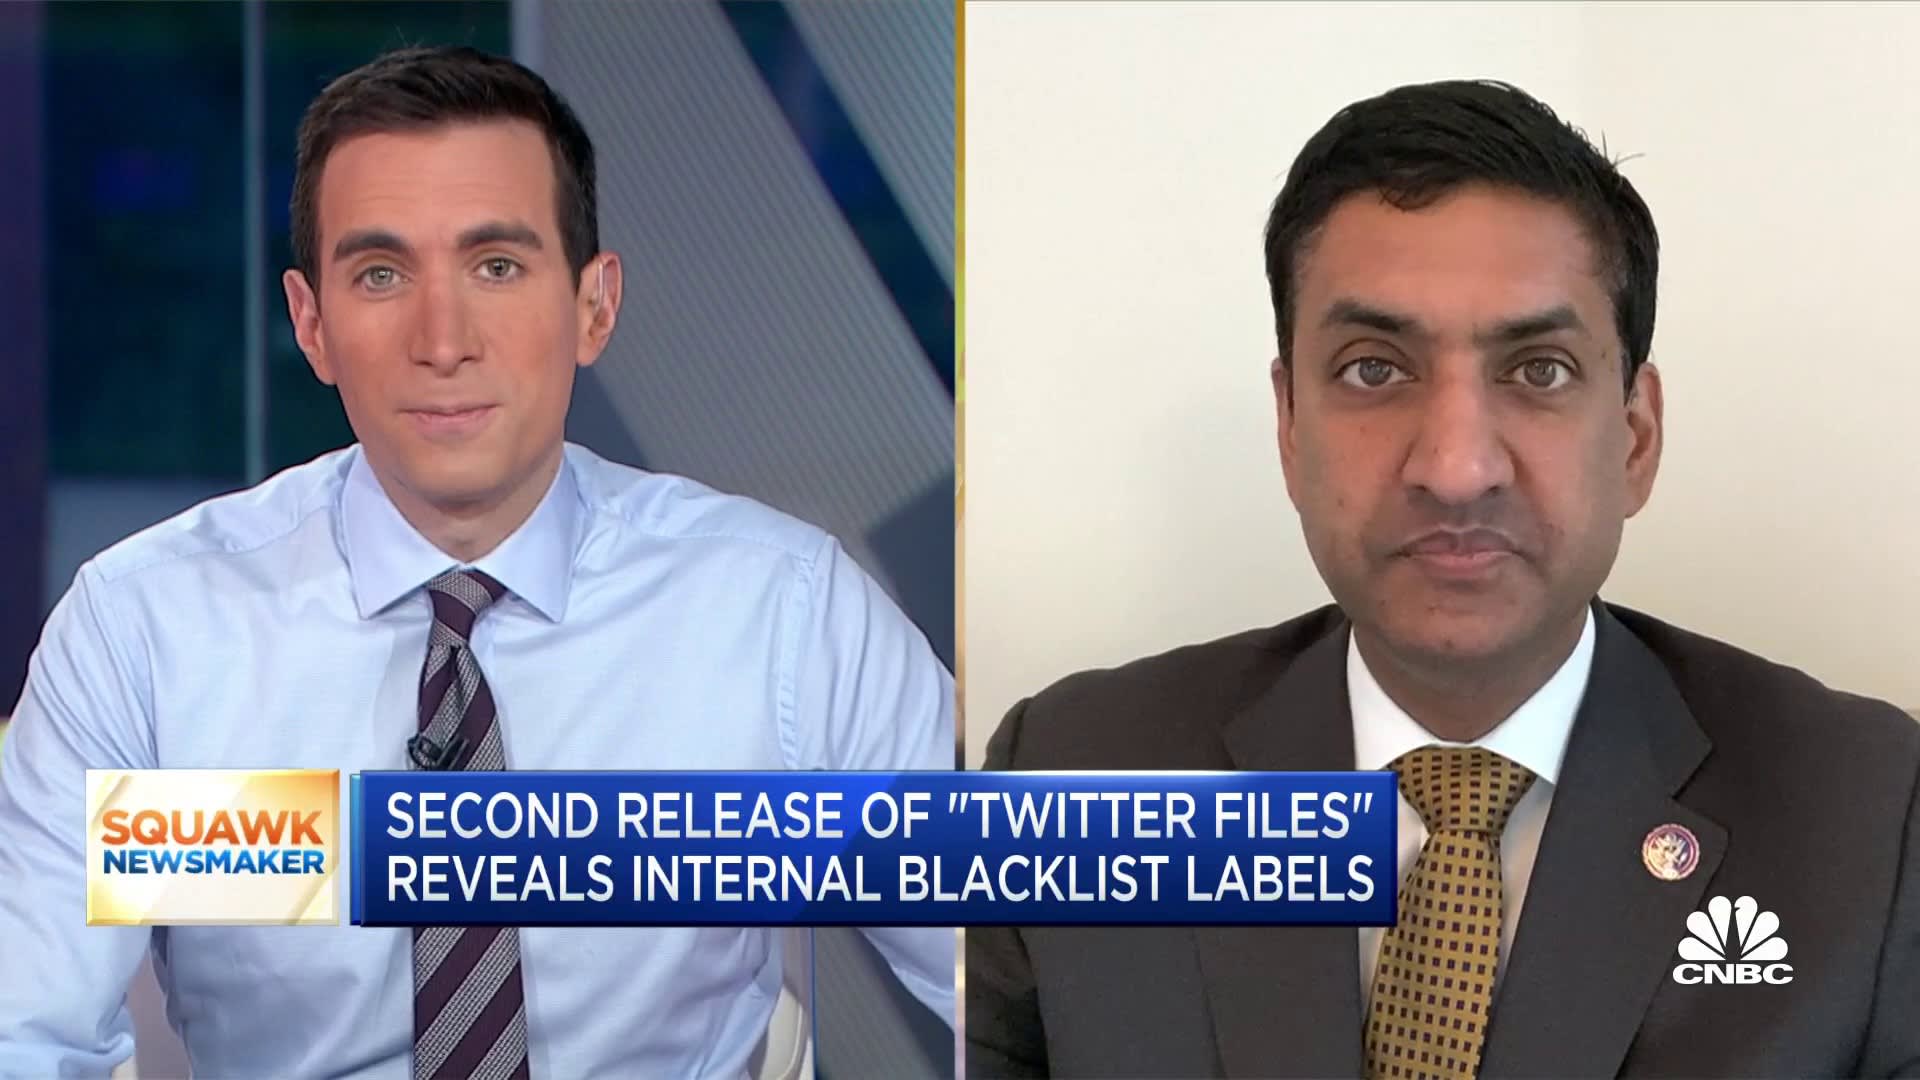 Twitter is the modern public square and should not censor journalists, says Rep. Ro Khanna